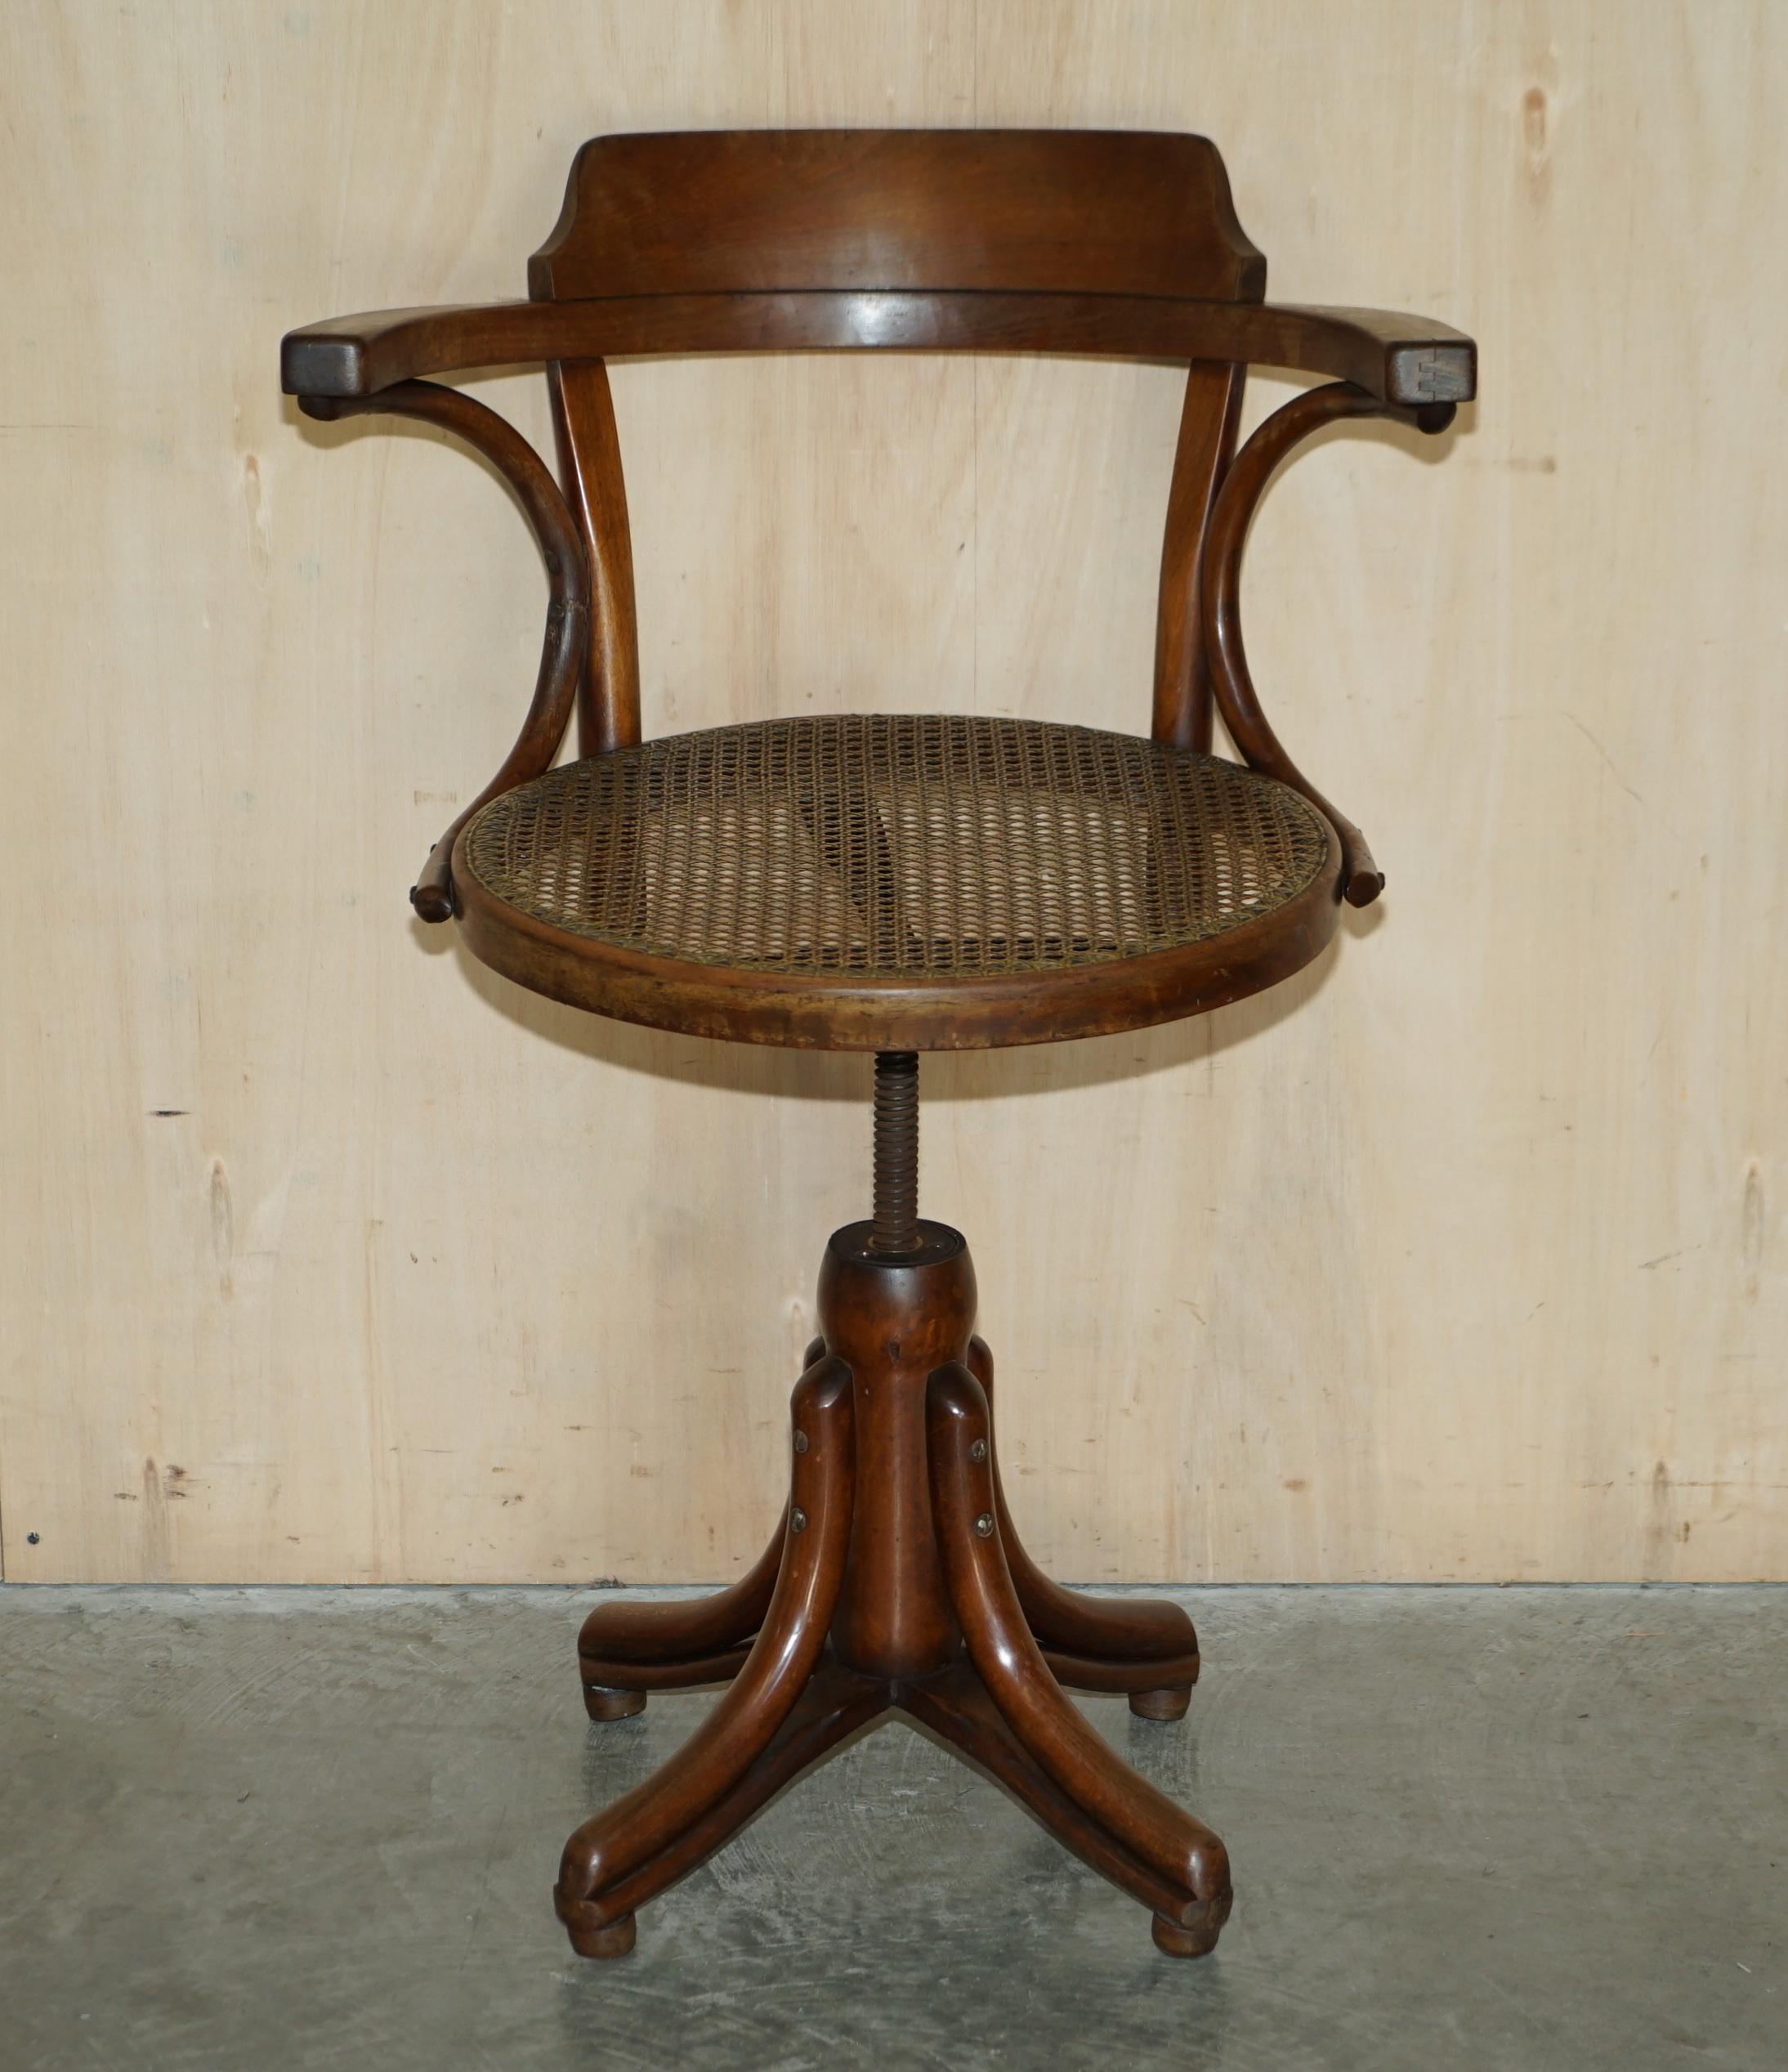 Royal House Antiques

Royal House Antiques is delighted to offer for sale this super rare, original, antique, Thonet Model No 3 swivel bergère chair circa 1900

Please note the delivery fee listed is just a guide, it covers within the M25 only for